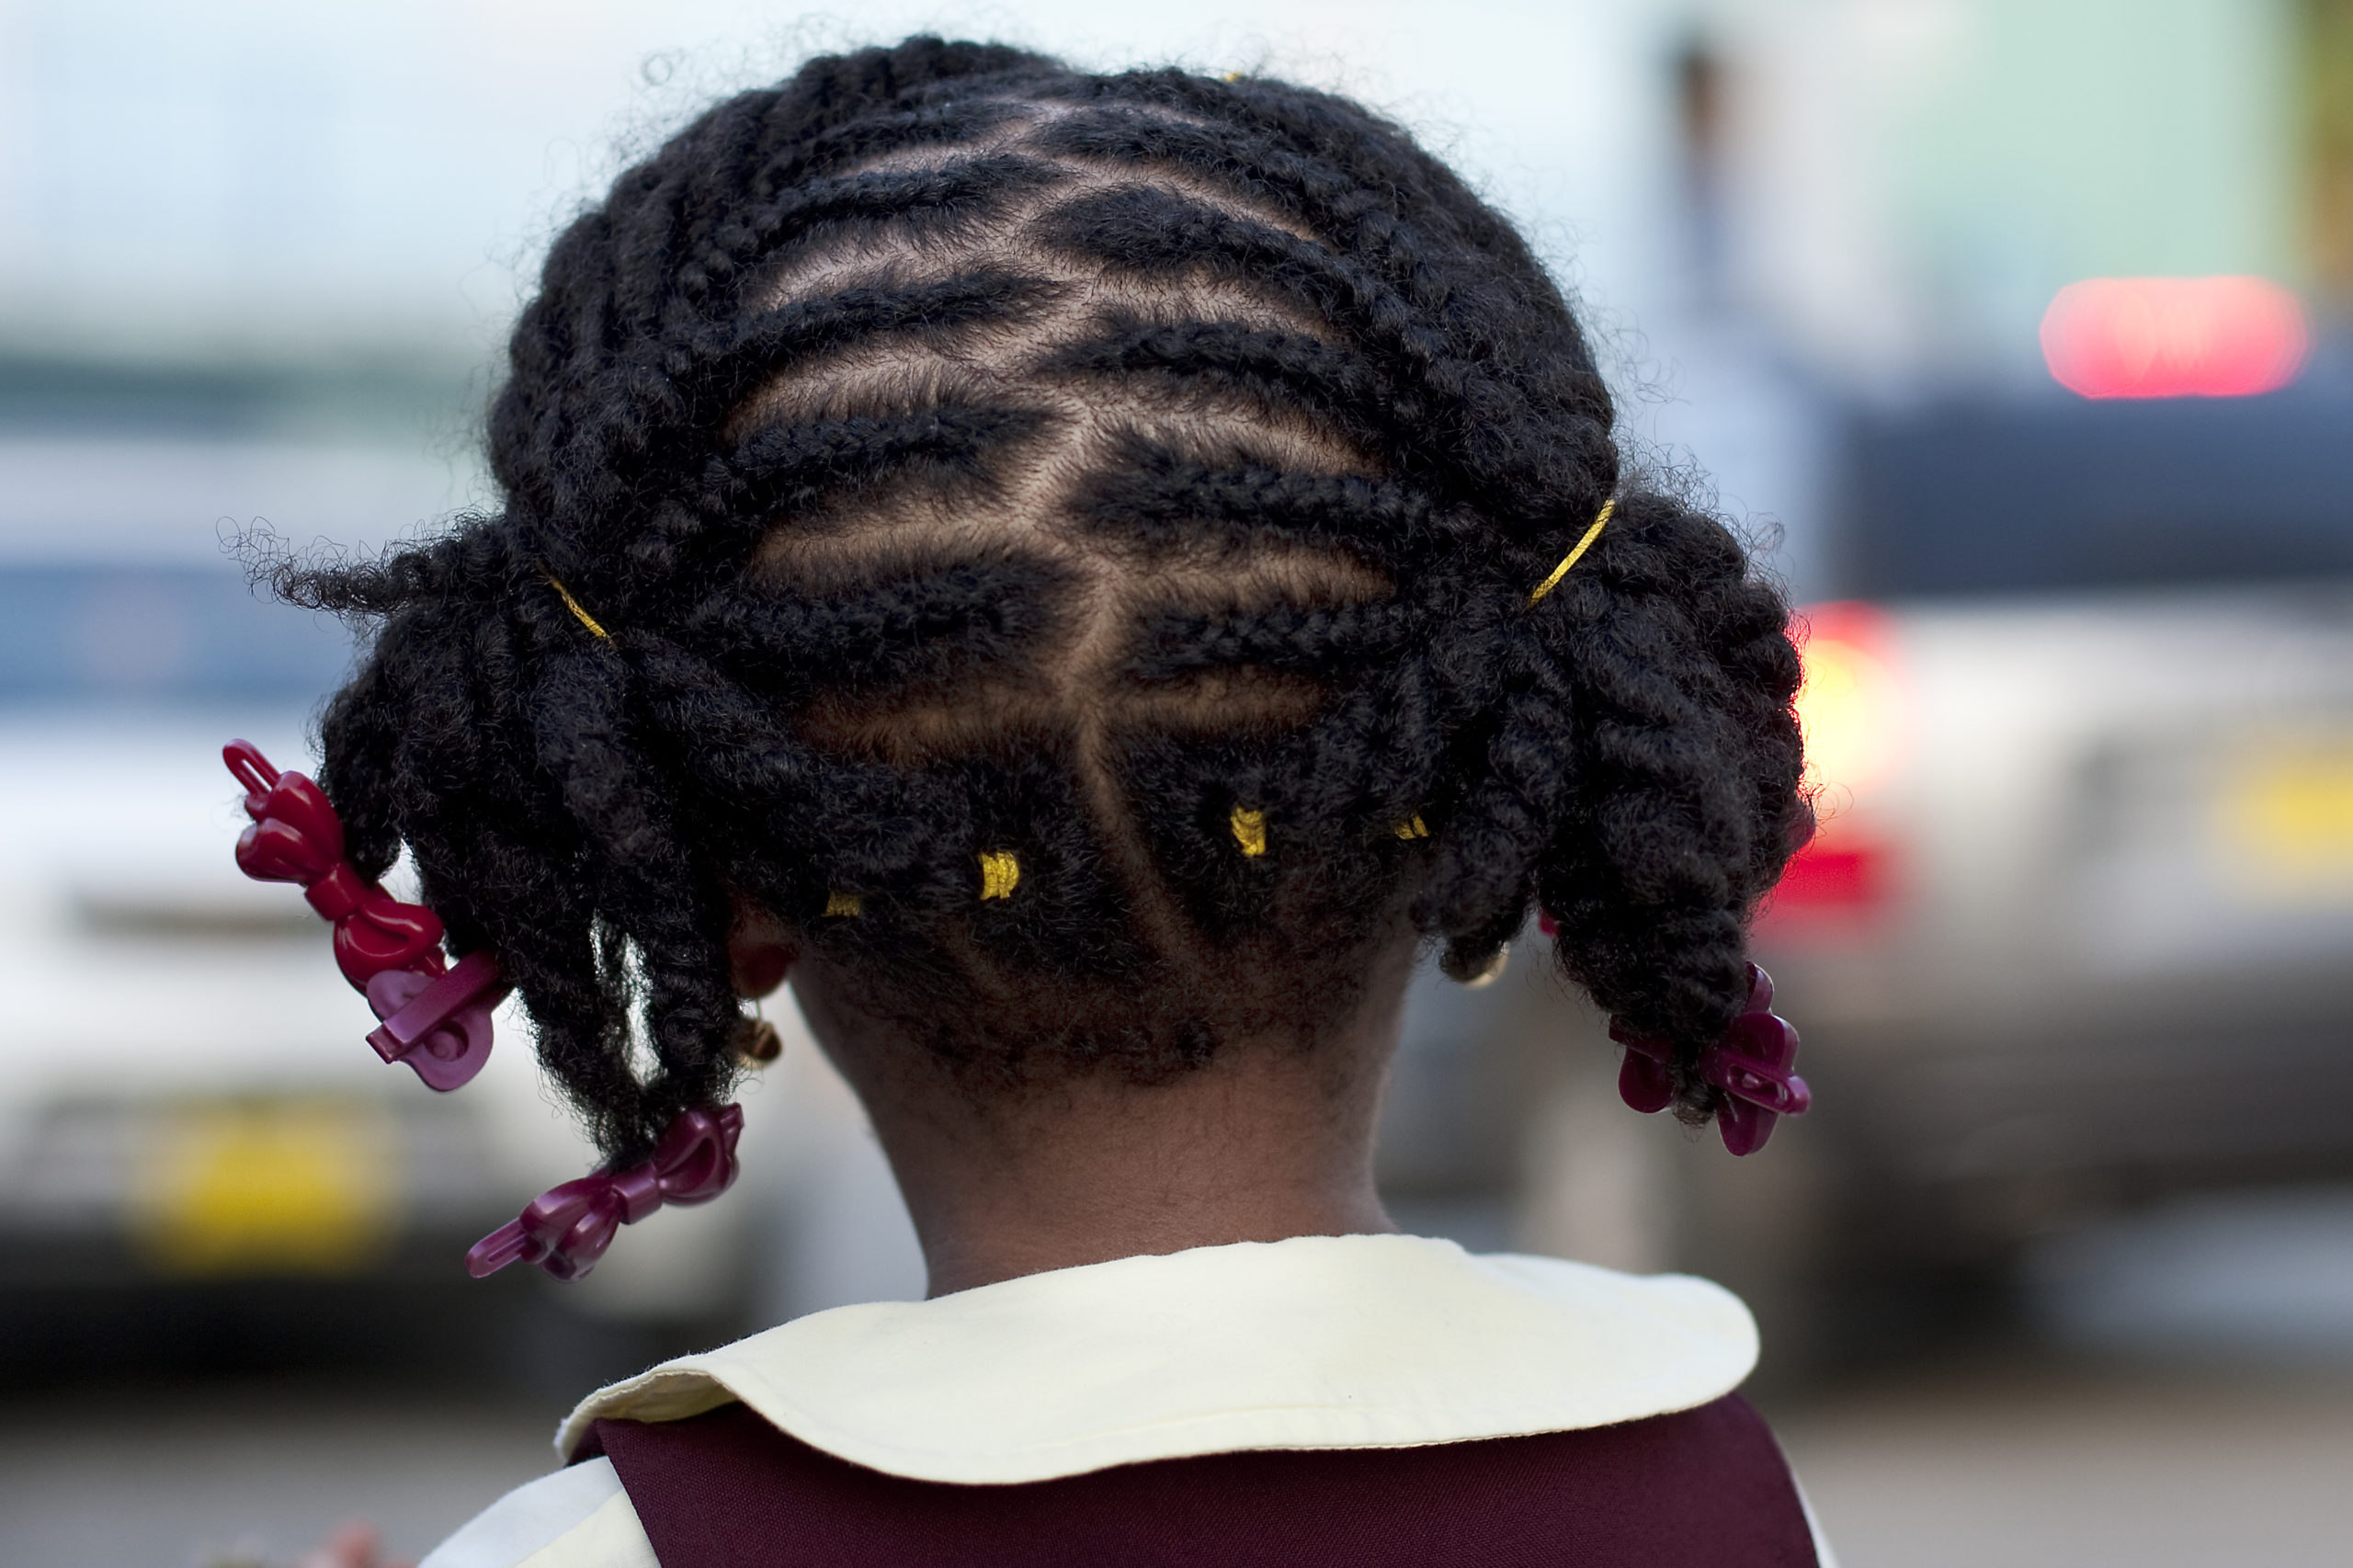 . Catholic Schools Found an Exemption to Continue Braids Ban Despite  State and City Laws Prohibiting Hair Discrimination